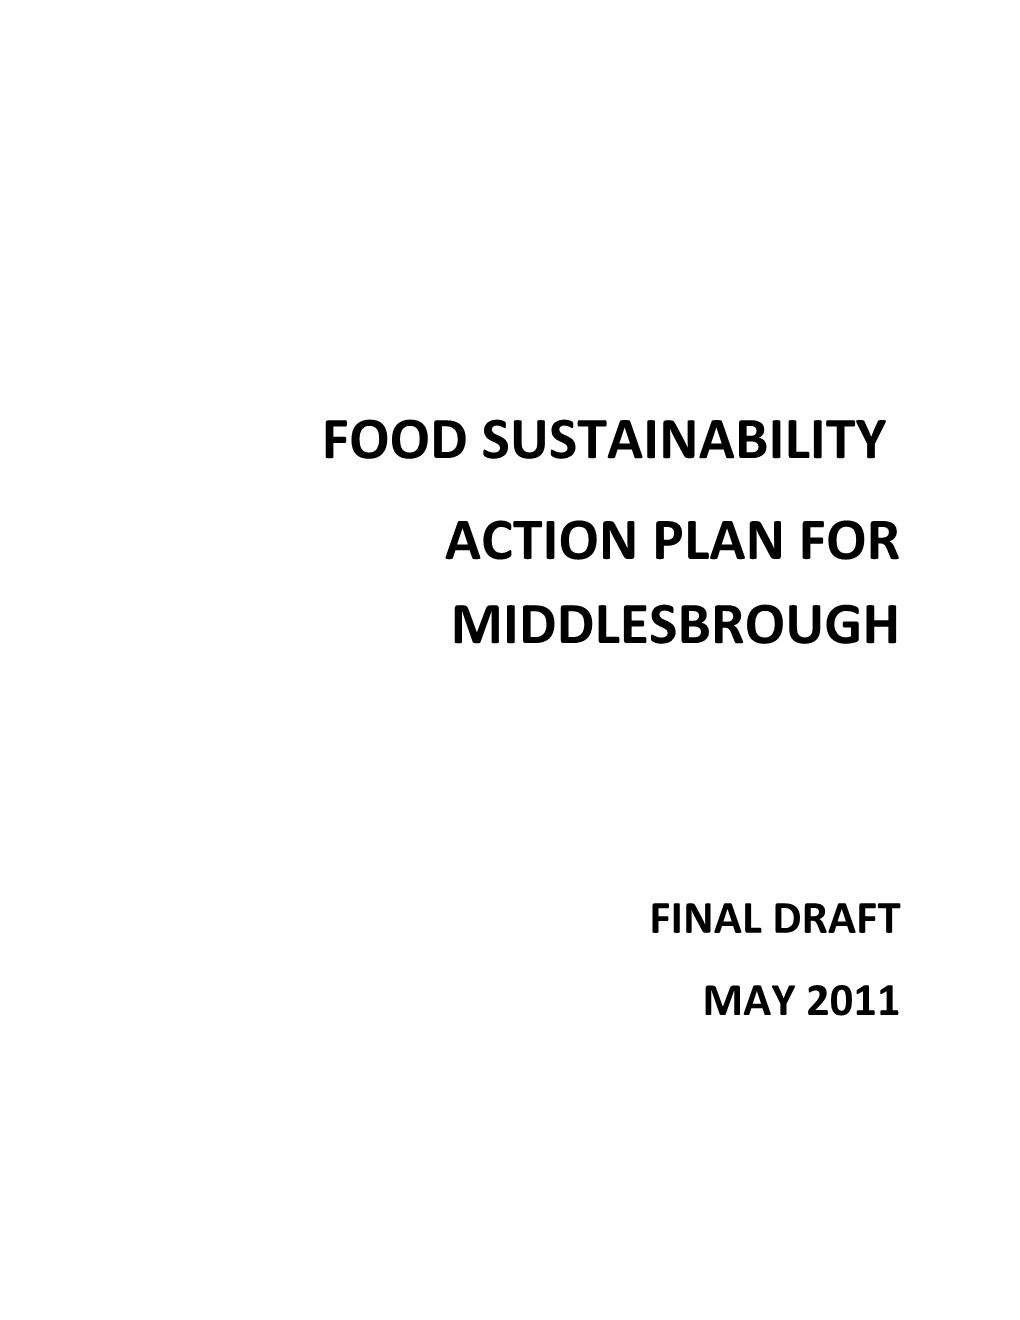 Action Plan for Middlesbrough